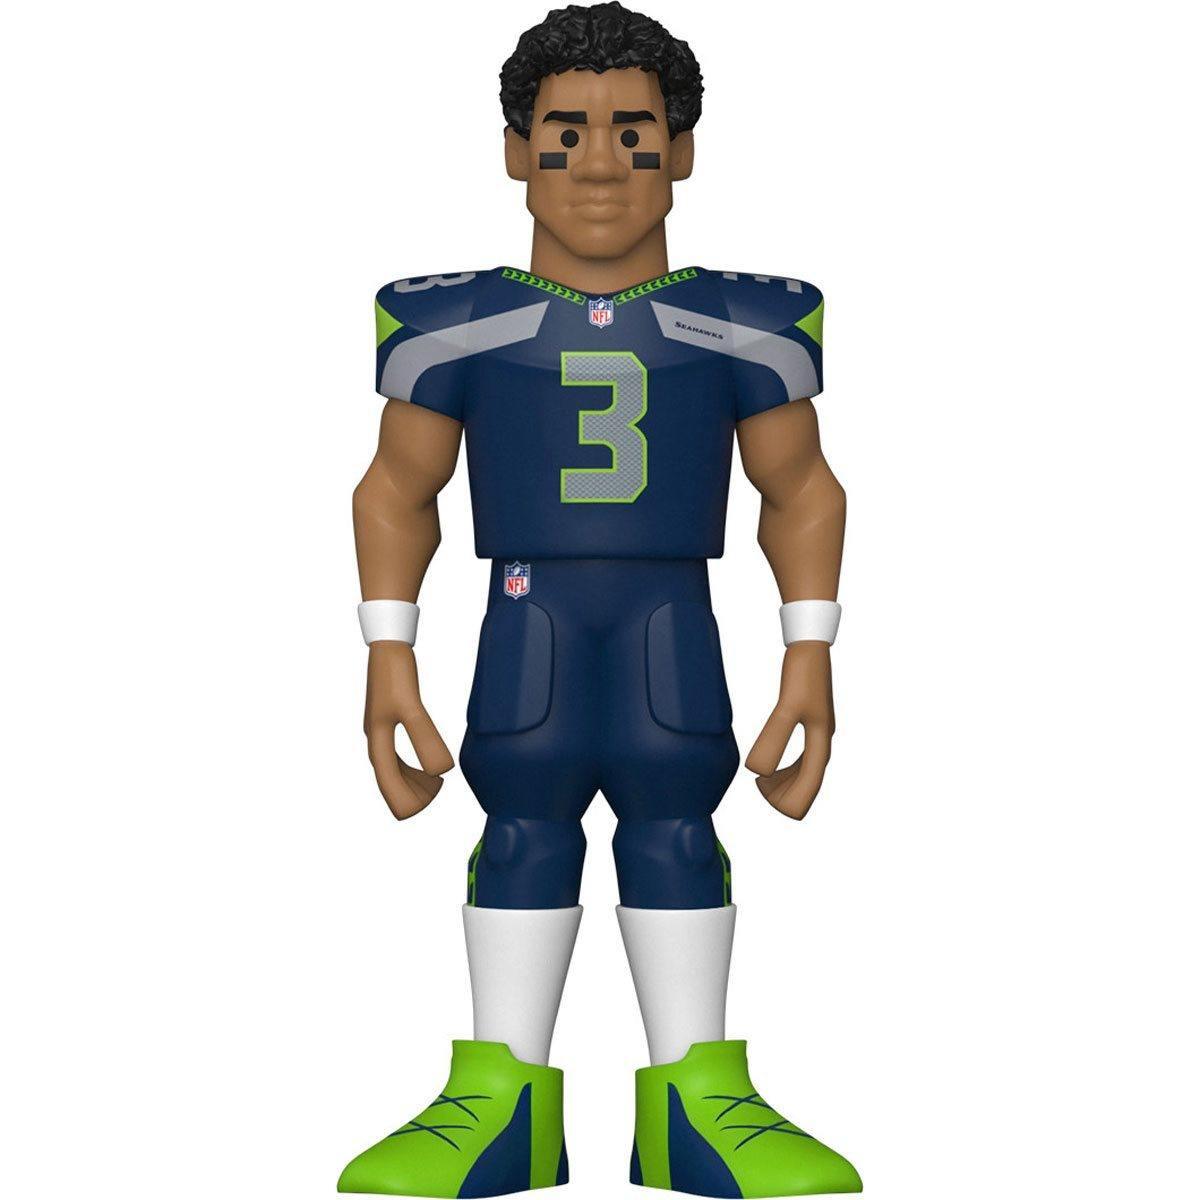 FUN57281 NFL: Seahawks - Russell Wilson (with chase) 5" Vinyl Gold - Funko - Titan Pop Culture